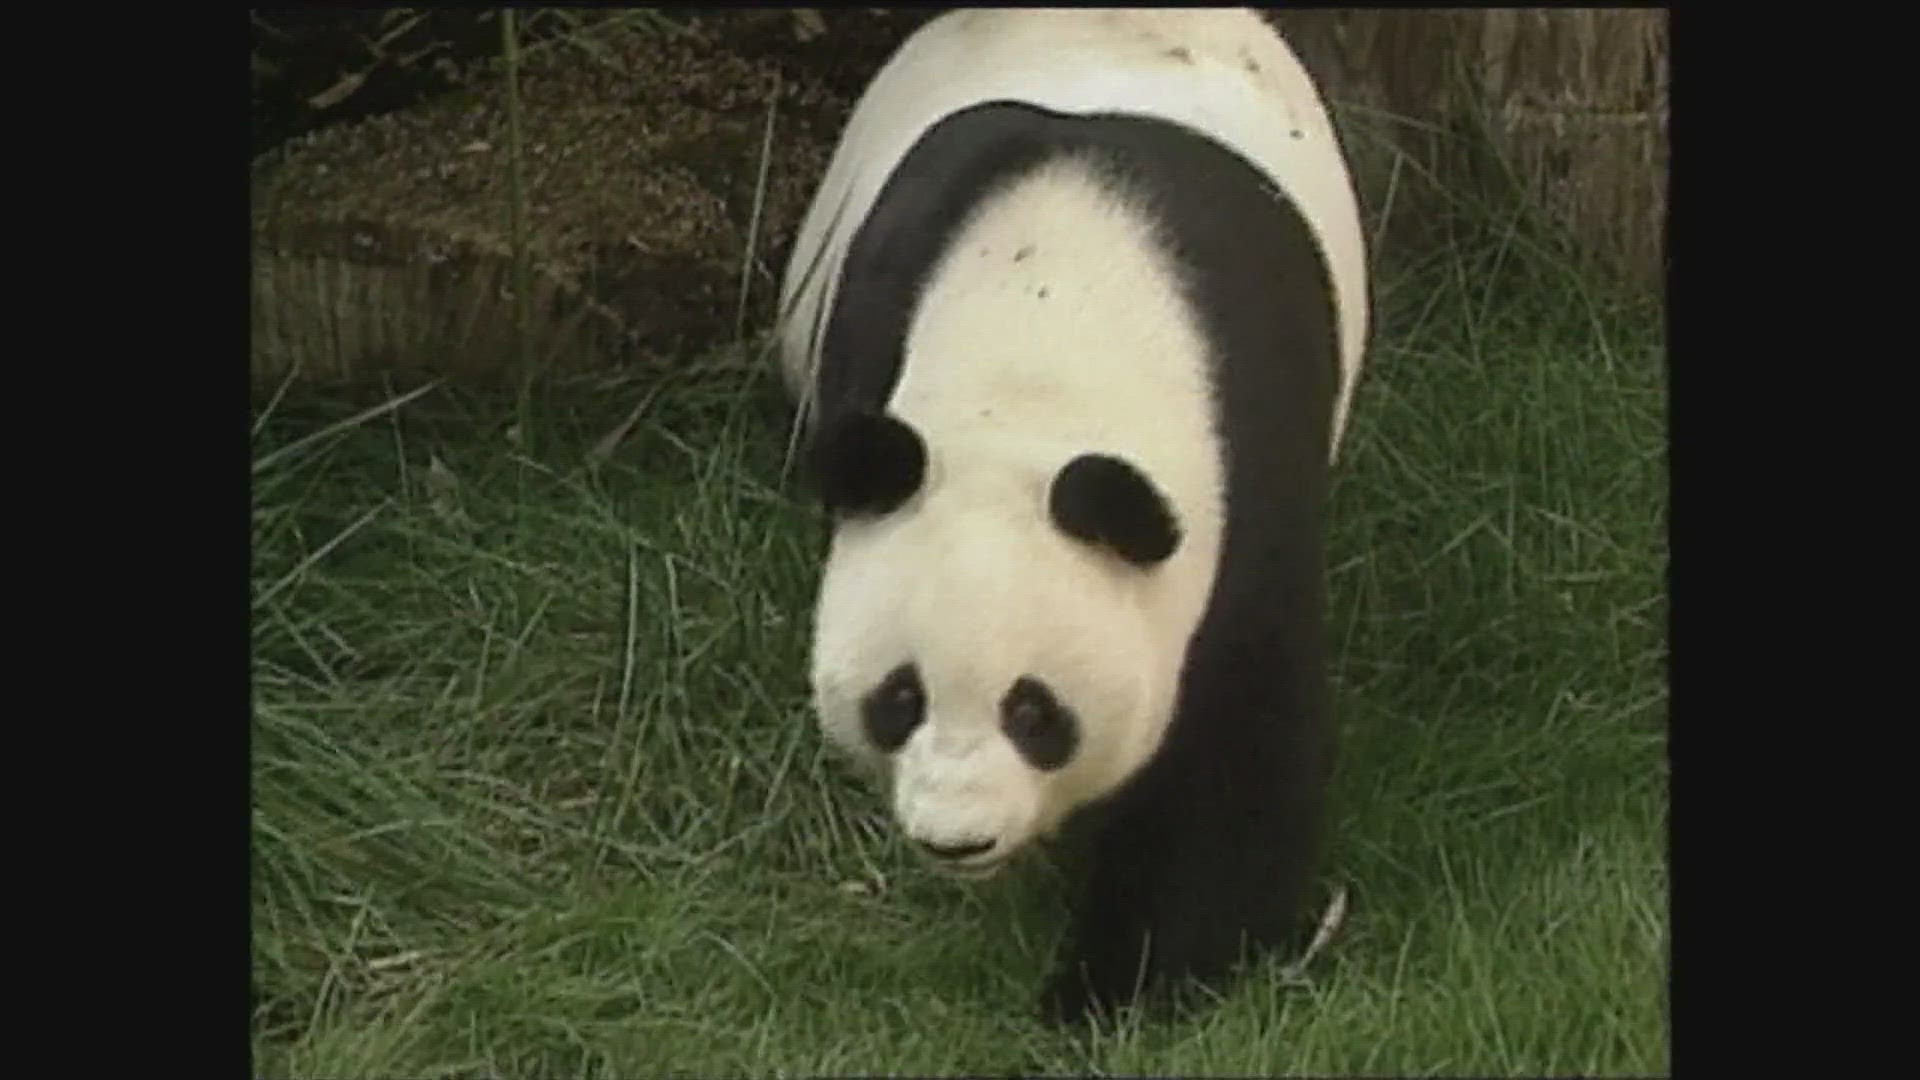 CBS 8 is celebrating 75 years of broadcasting in San Diego County in 2024. Here's a look at past coverage of the pandas in San Diego over the years.